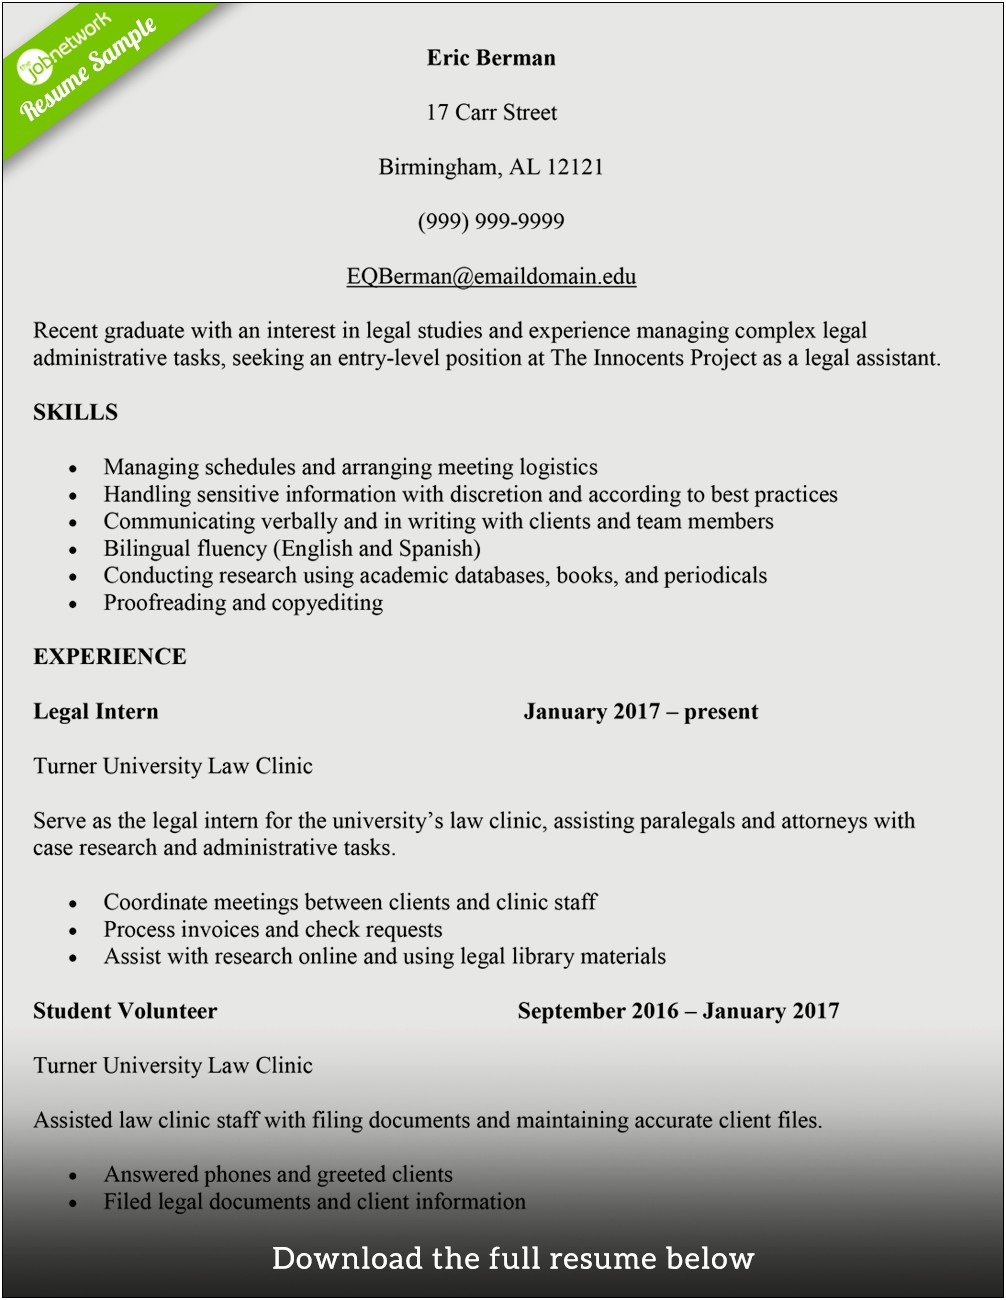 Samples Of Resume For Legal Assistant